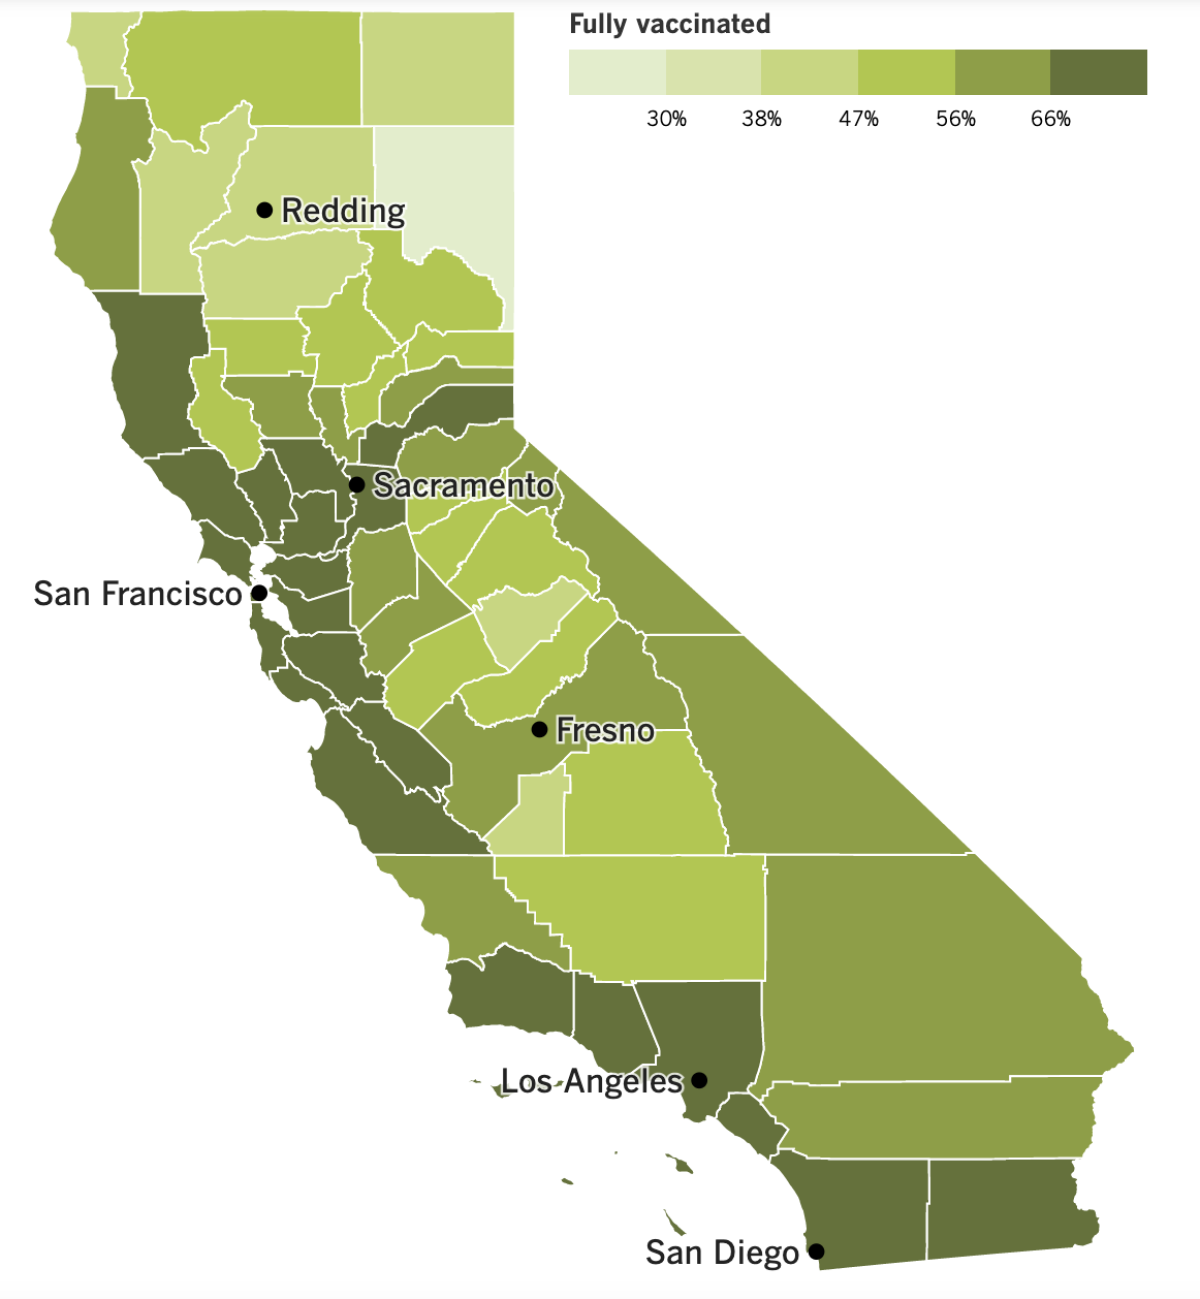 A map showing California's COVID-19 vaccination progress as of Feb. 8, 2022.